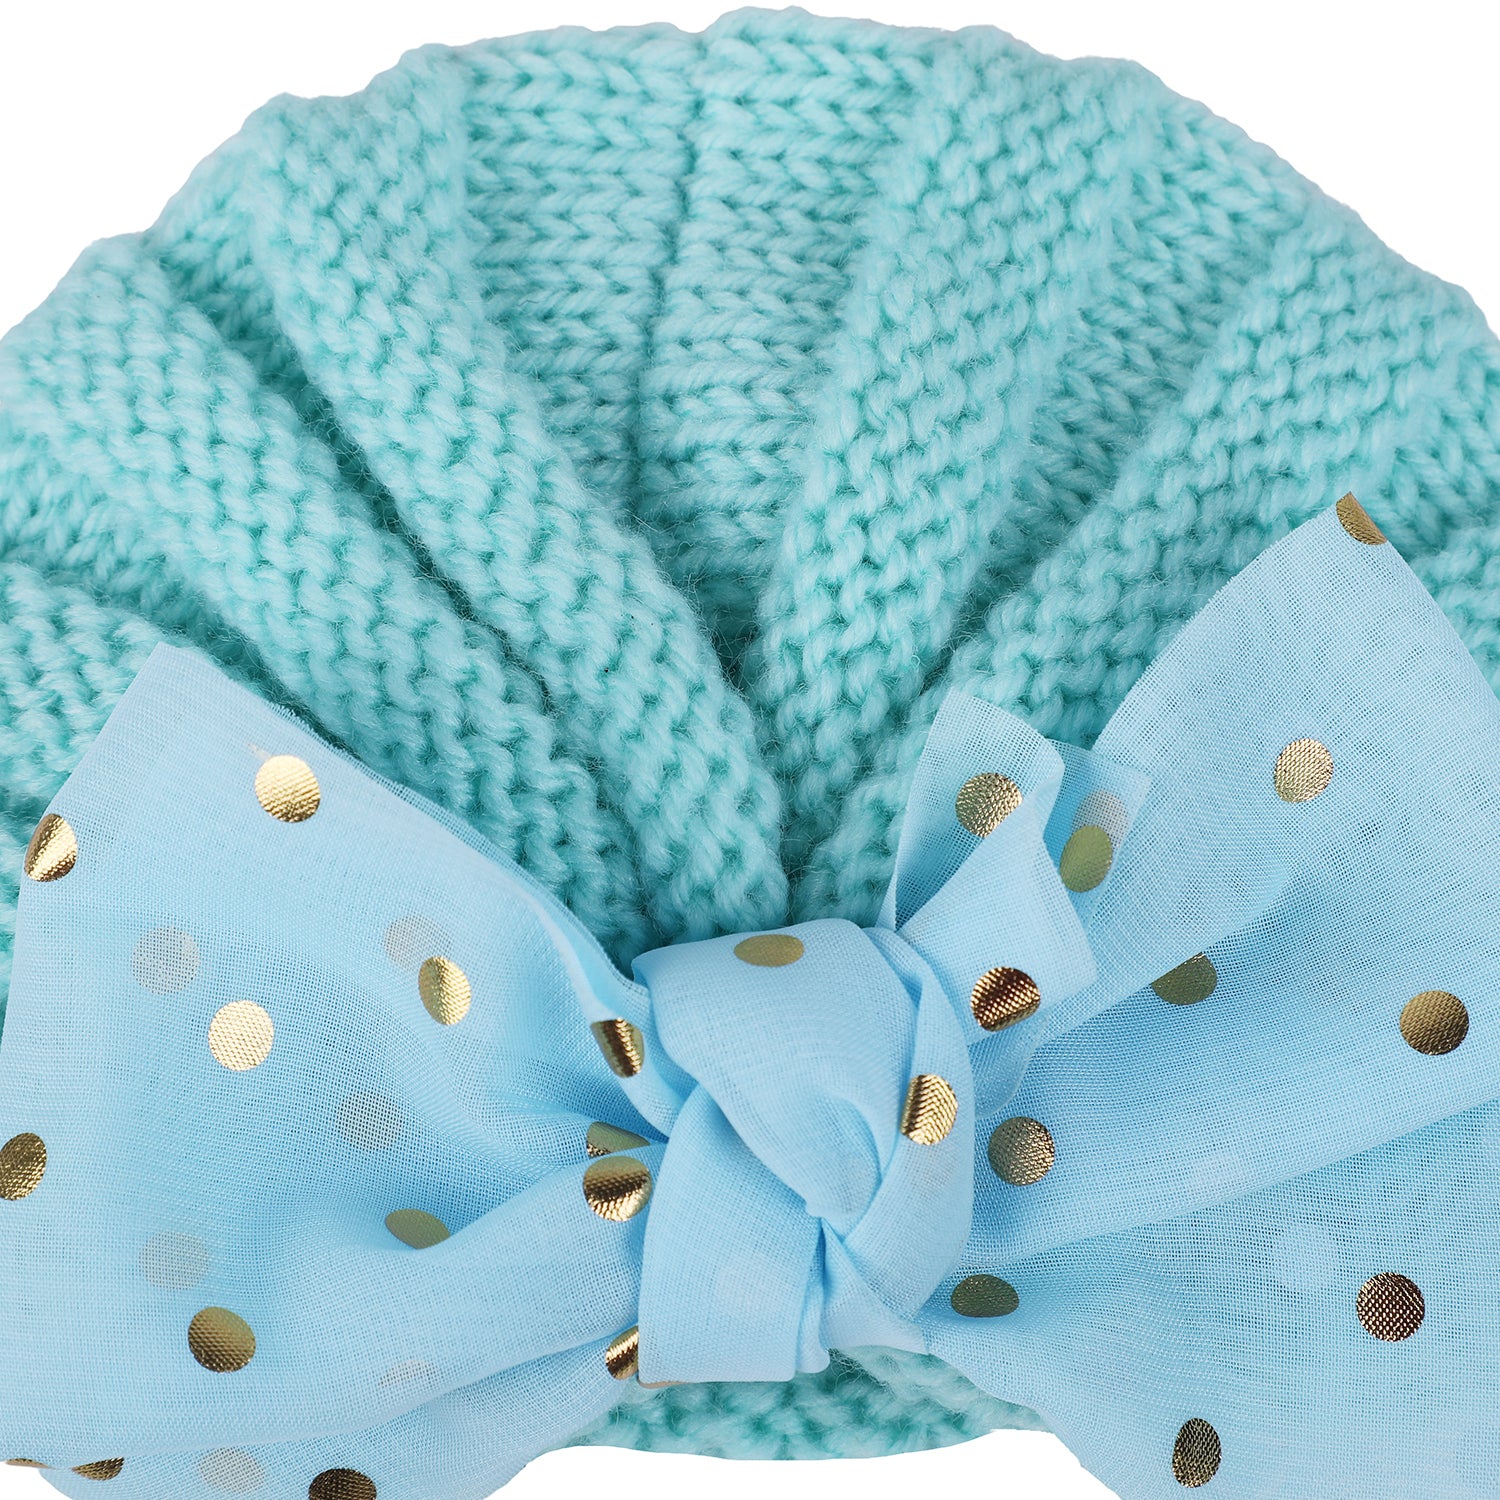 Baby Moo Partywear Sequence Bow 2 Pack Turban Caps - Pink And Blue - Baby Moo